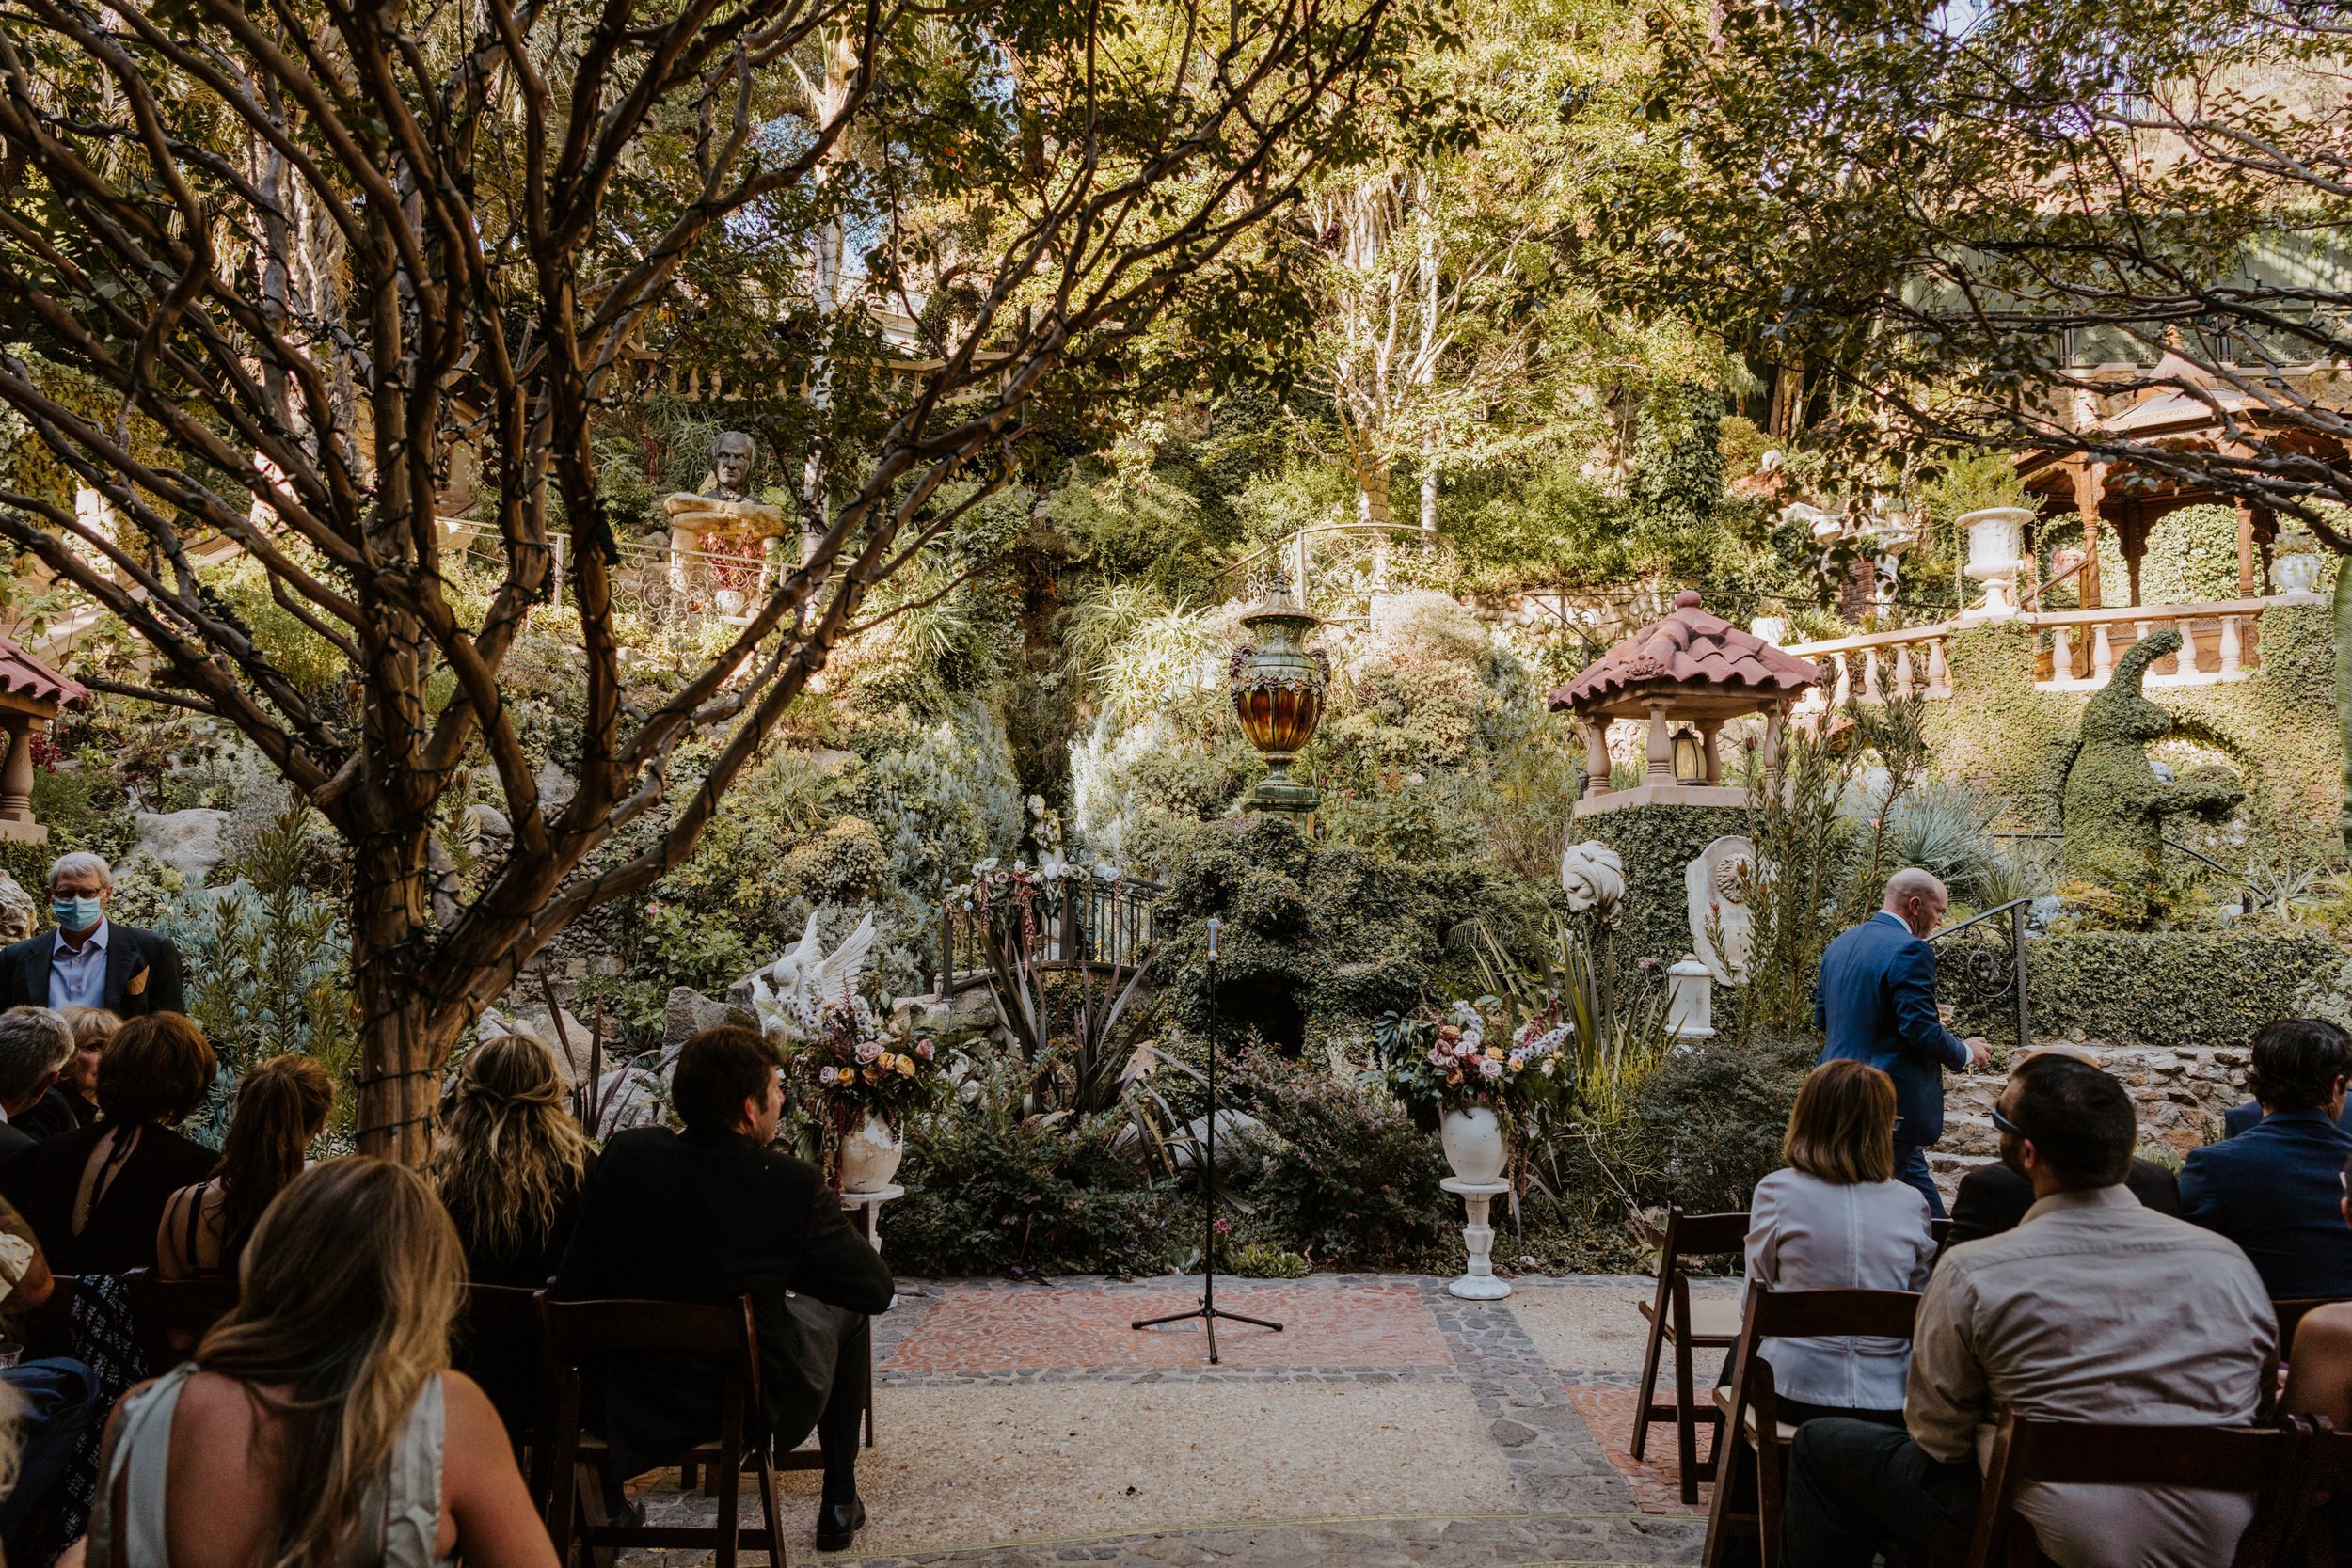 Romantic and whimsical wedding ceremony set up at The Houdini Estate, Los Angeles wedding photography by Tida Svy